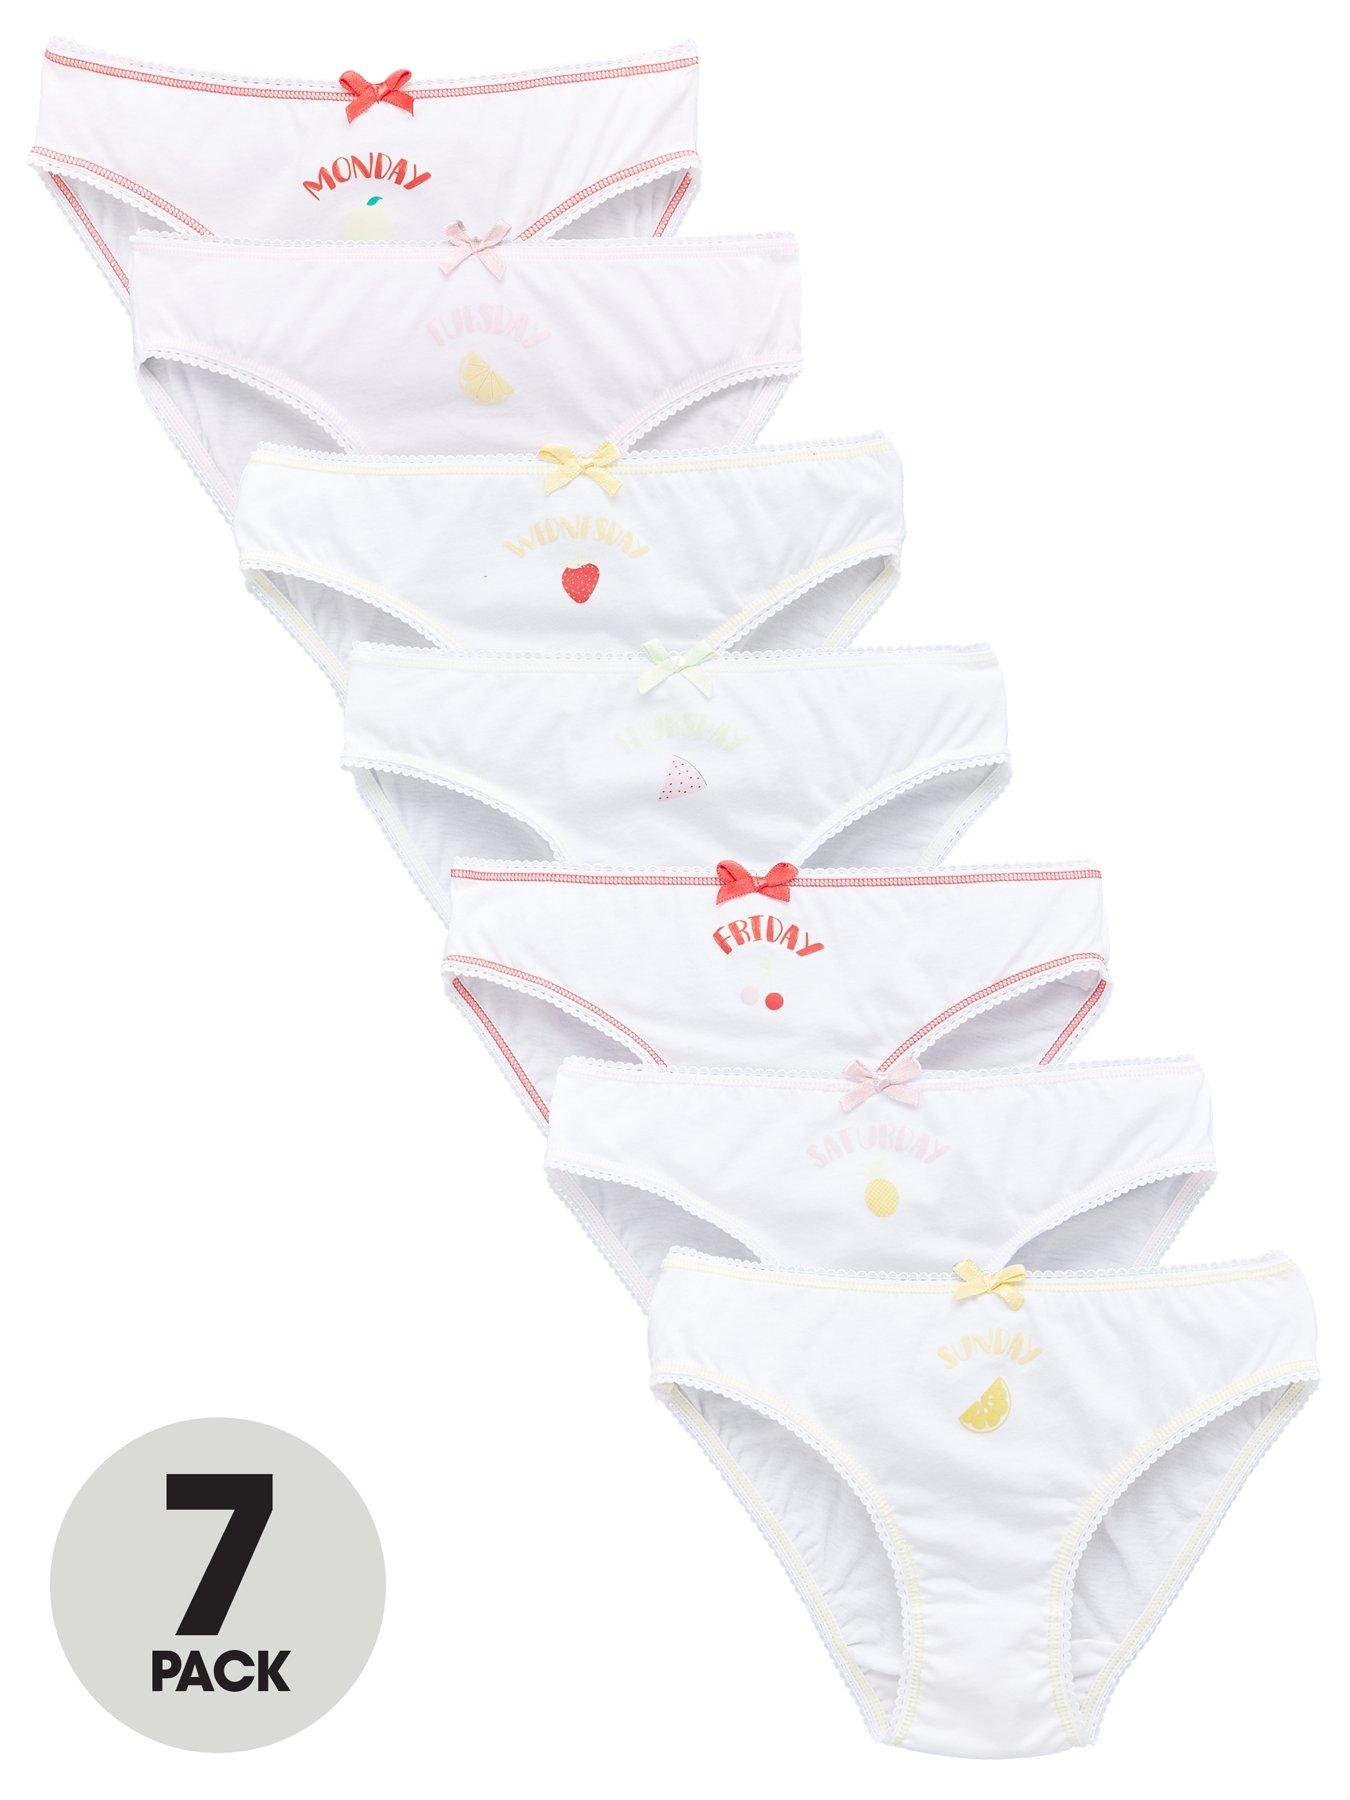  Sonic The Hedgehog Girls' 7-Pack 100% Cotton Underwear  Available in Sizes 4, 6, and 8: Clothing, Shoes & Jewelry